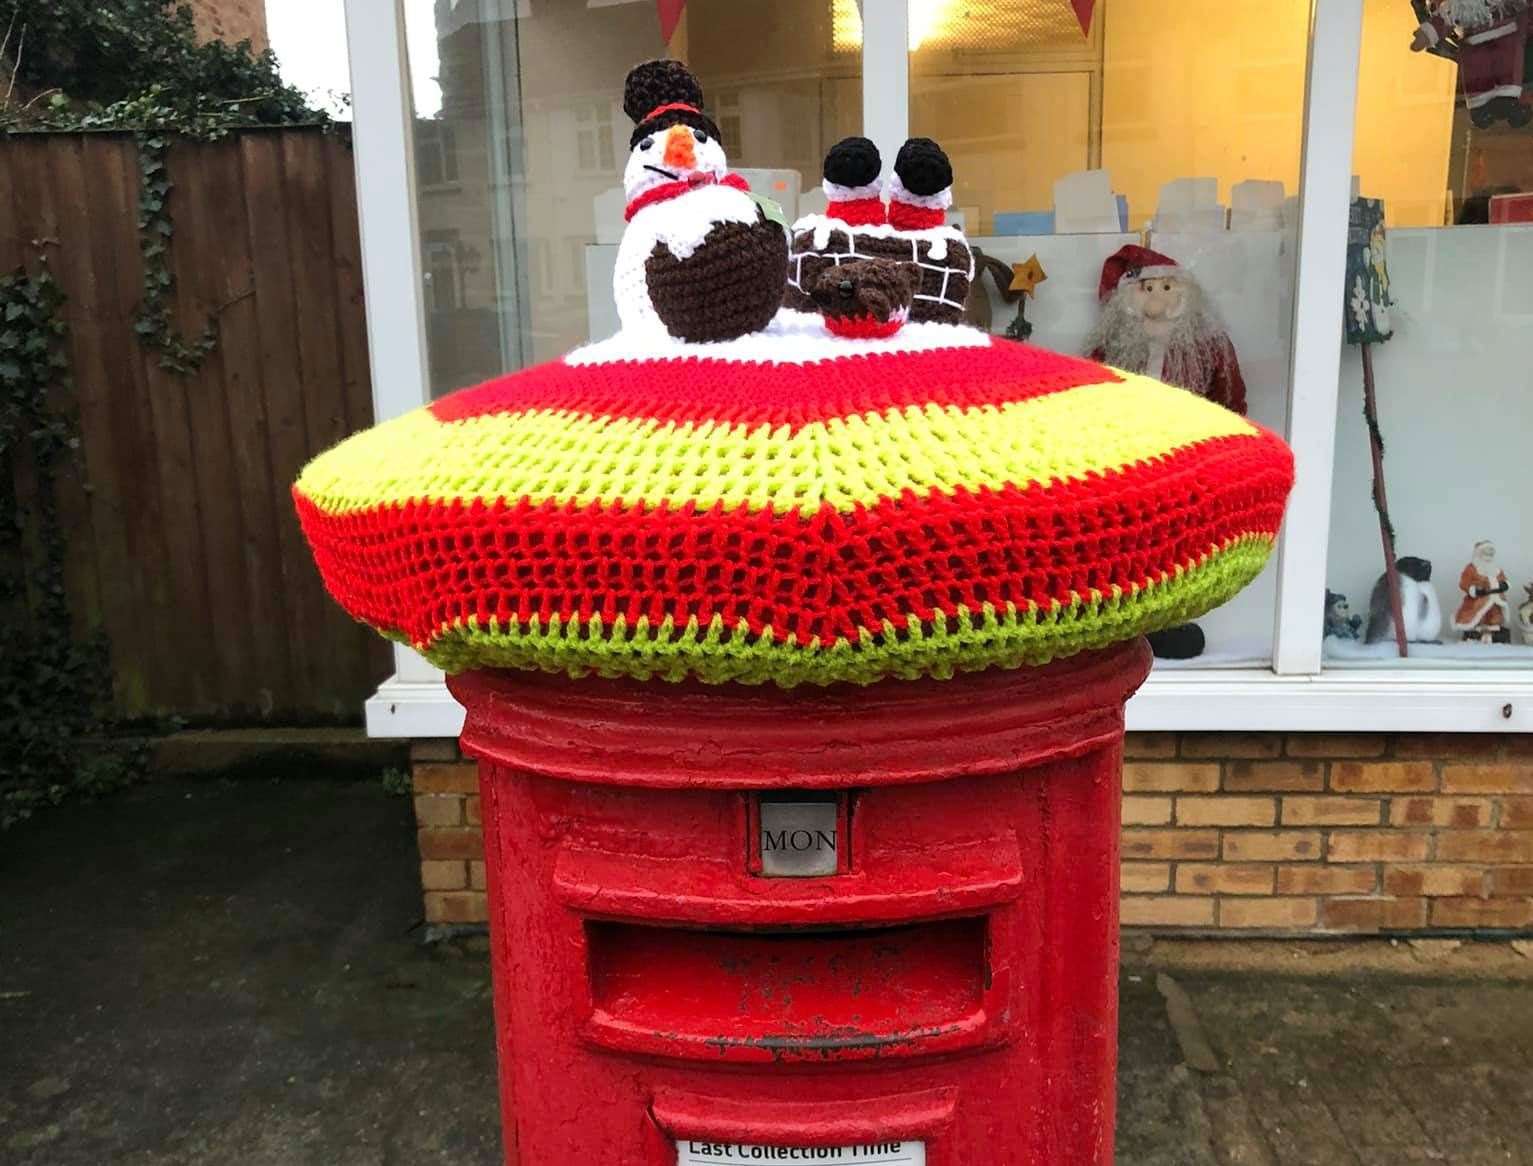 The knitted post box outside Minster-on-Sea sub post office